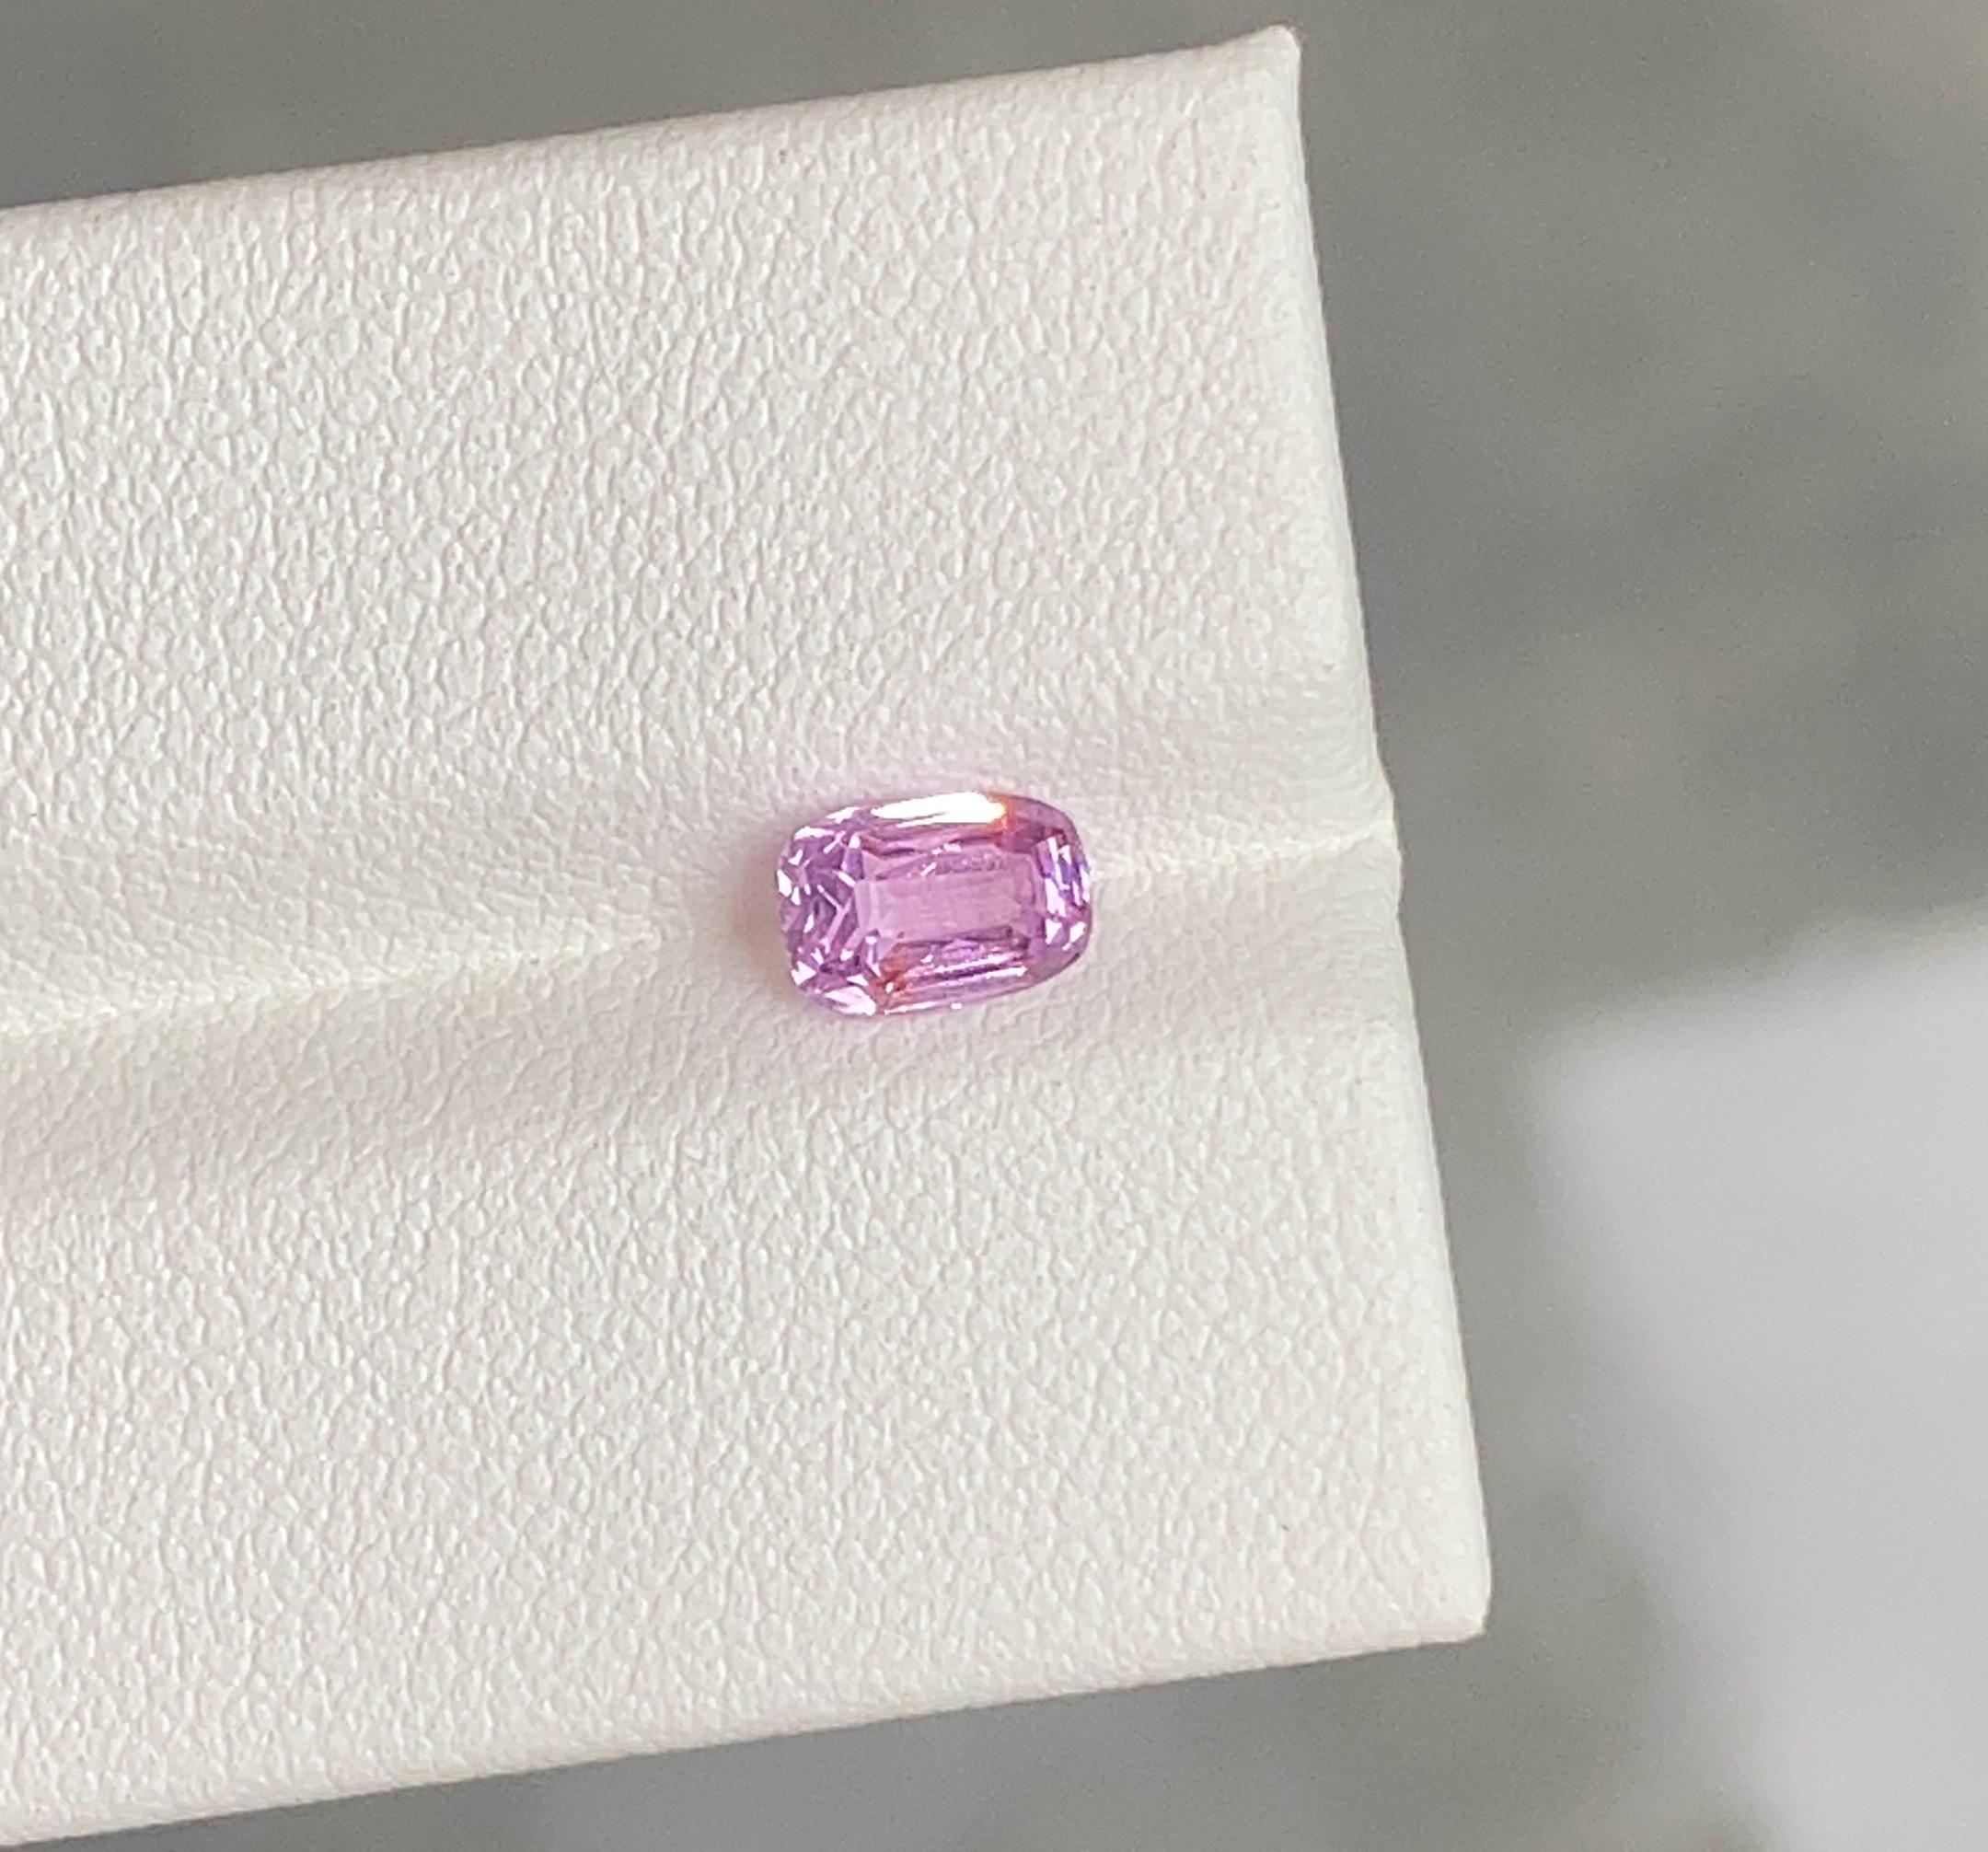 Ceylon Pink Spinel 1.10 Carats unheated come with Pink color and luster and perfect cut, unheated 

• Variety: Spinel
• Origin: Sri Lanka (Ceylon)
• Color(s): Pink
• Shape/Cutting Style: cushion
• Cut: Wellcut
• Dimensions: 7.6mm x 5.2mm x 4.5mm
•